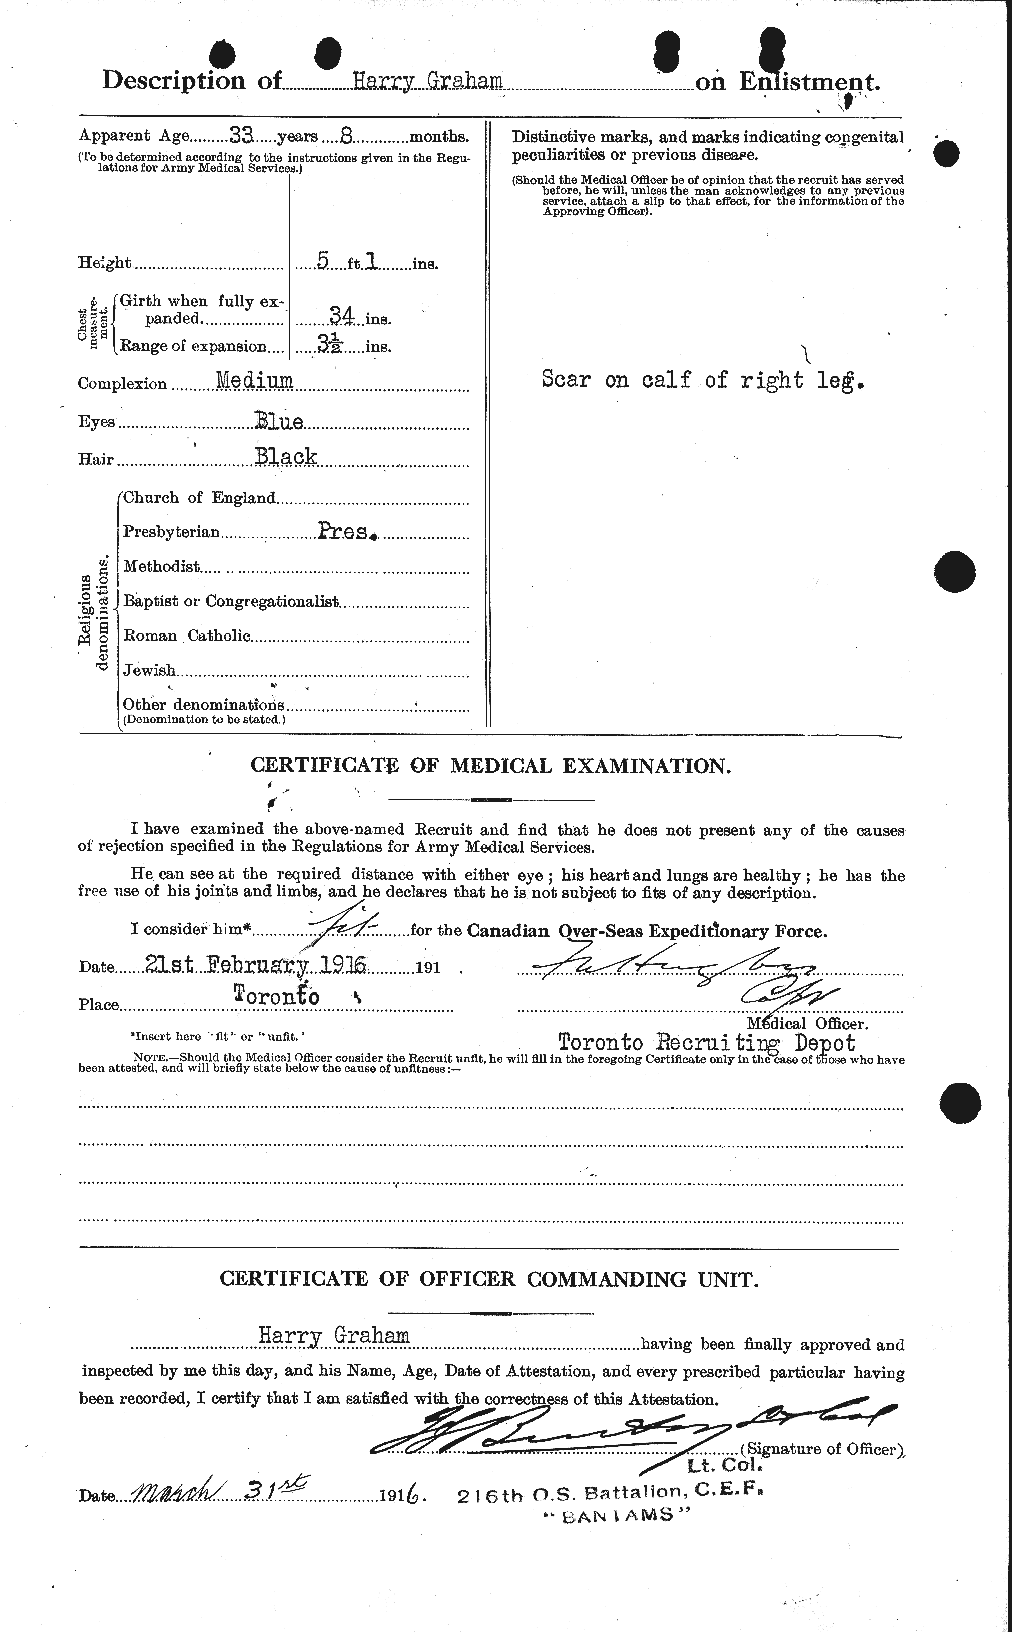 Personnel Records of the First World War - CEF 357713b